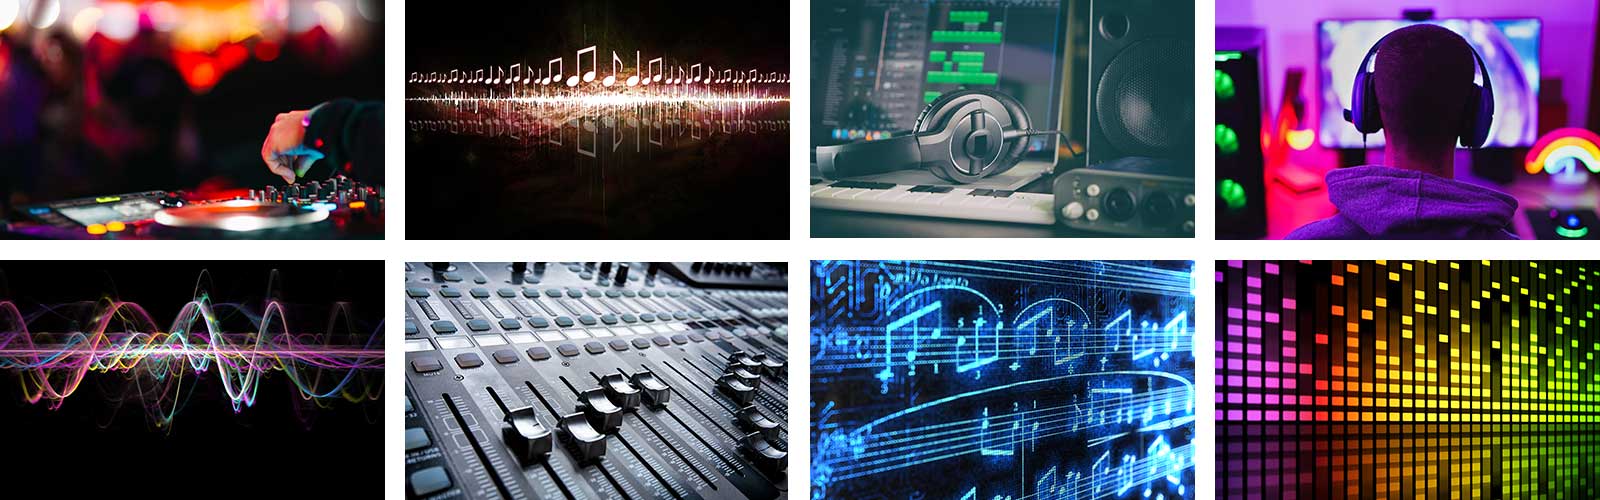 A variety of images showing musical notes and digital music equipment